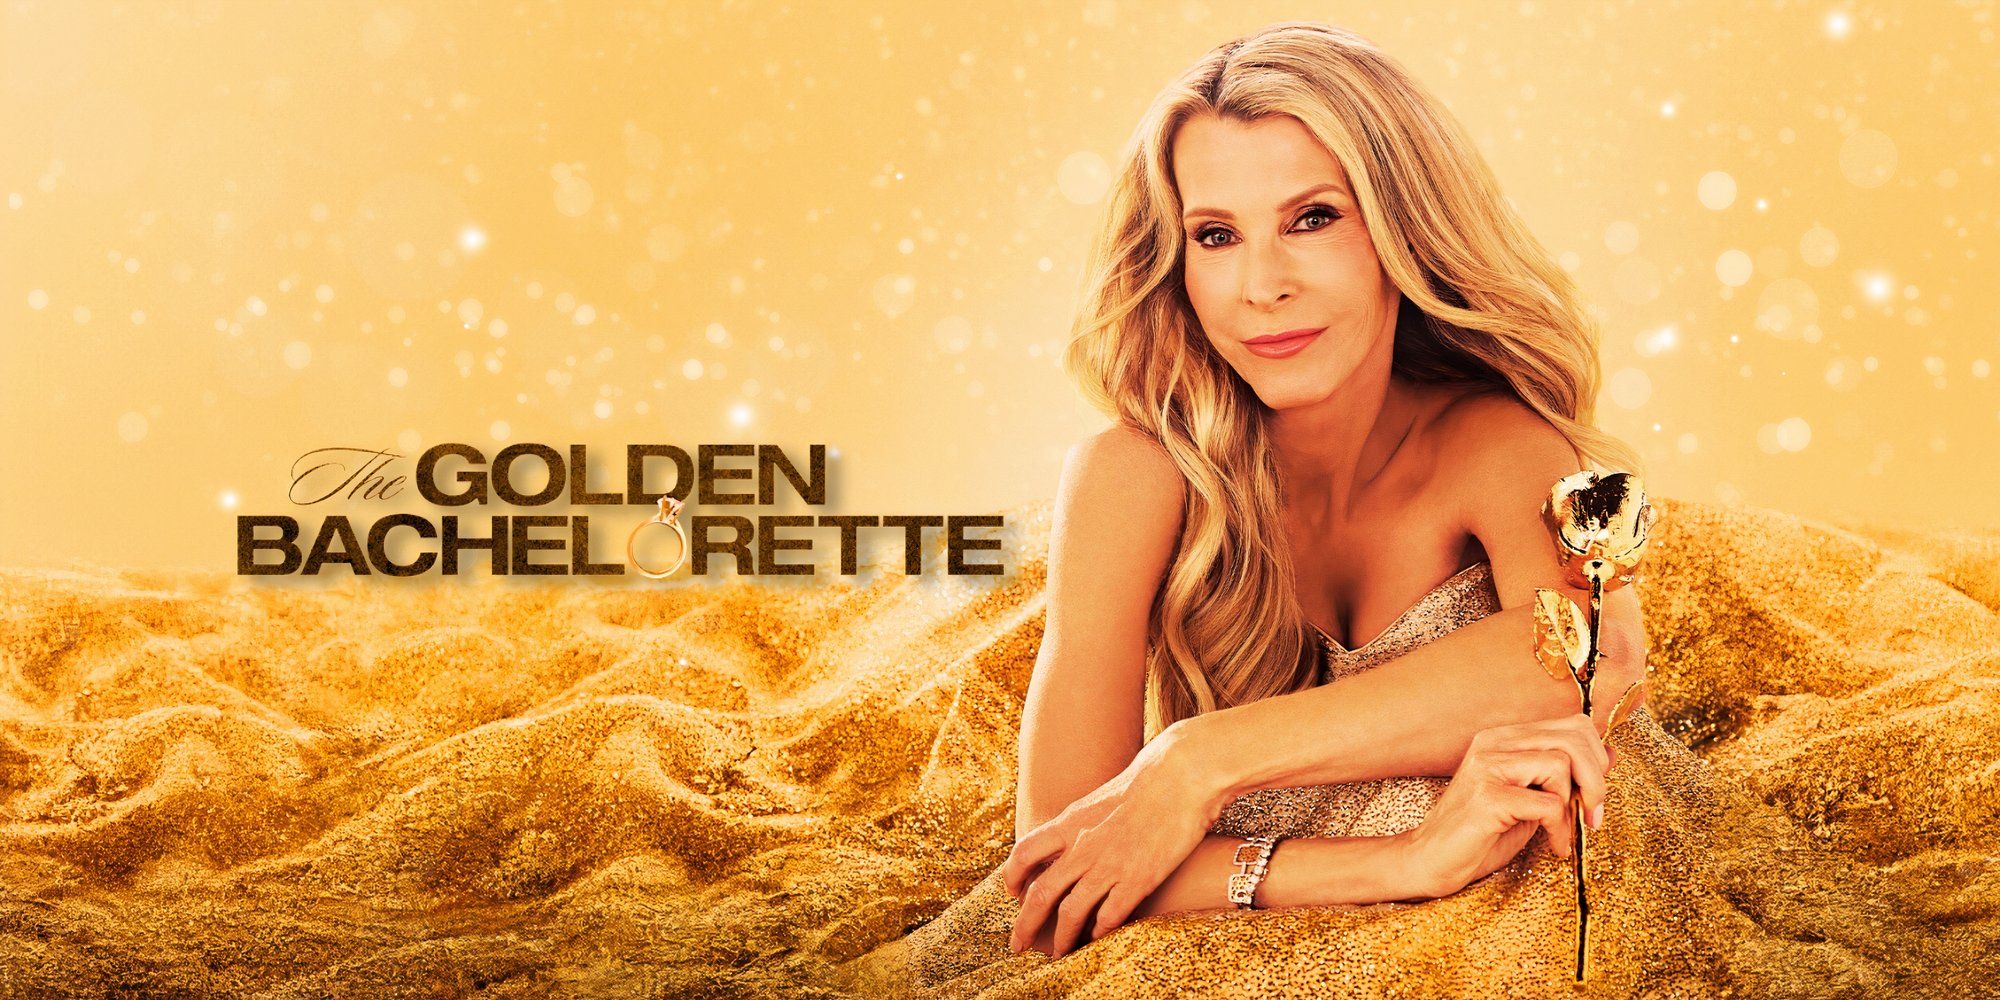 The Golden Bachelorette promo with Joan